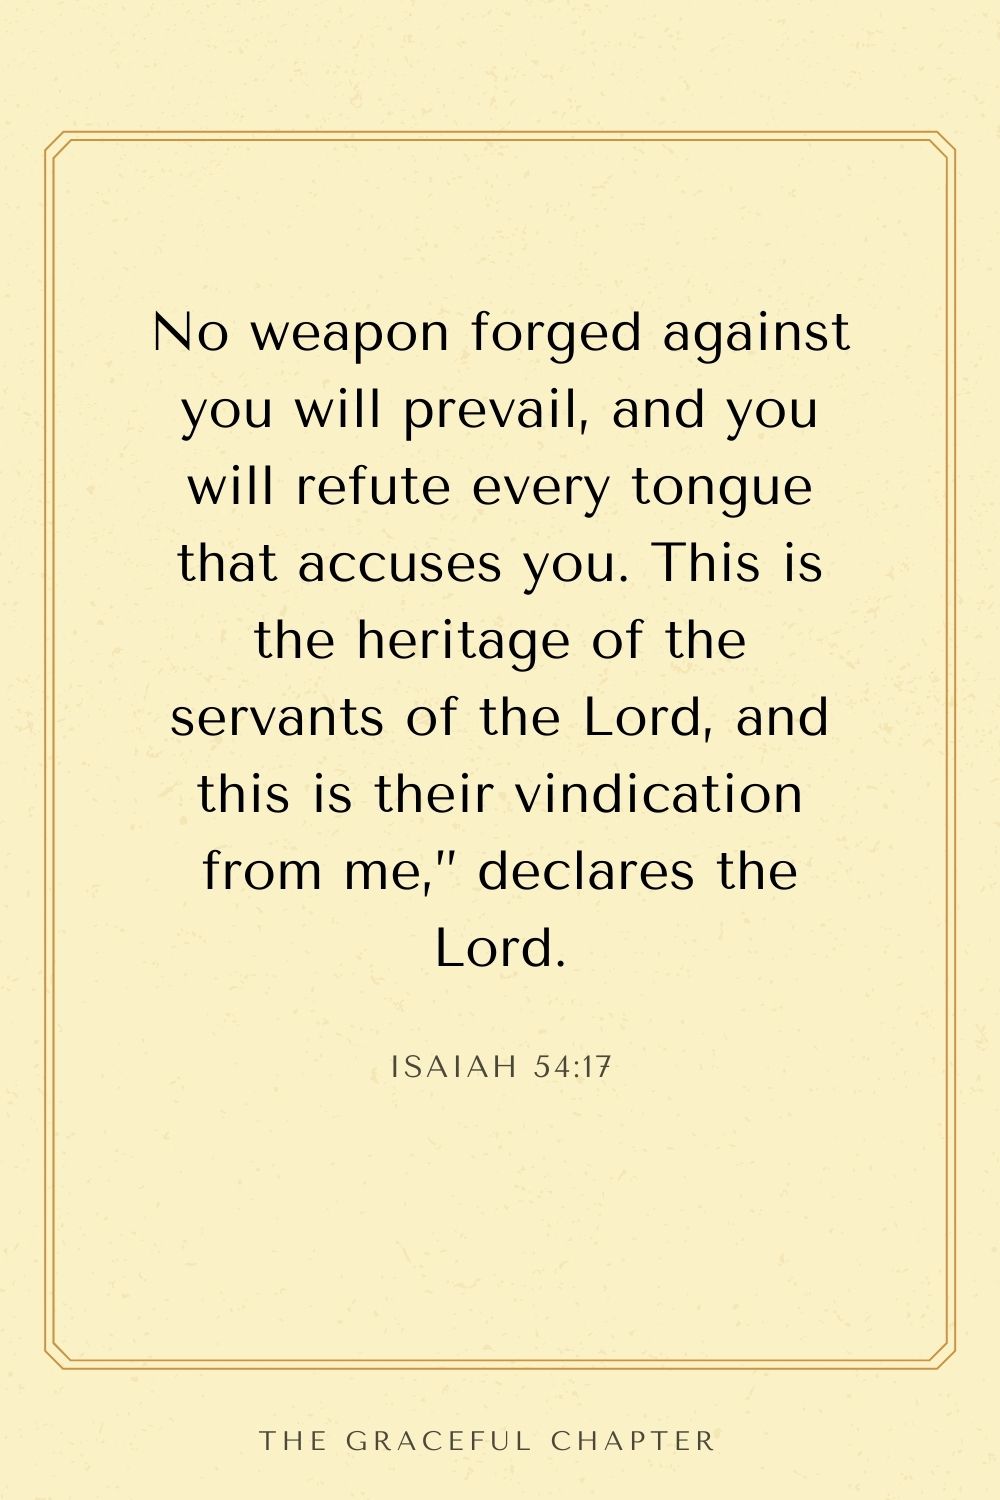 No weapon forged against you will prevail, and you will refute every tongue that accuses you. This is the heritage of the servants of the Lord, and this is their vindication from me,” declares the Lord. Isaiah 54:17